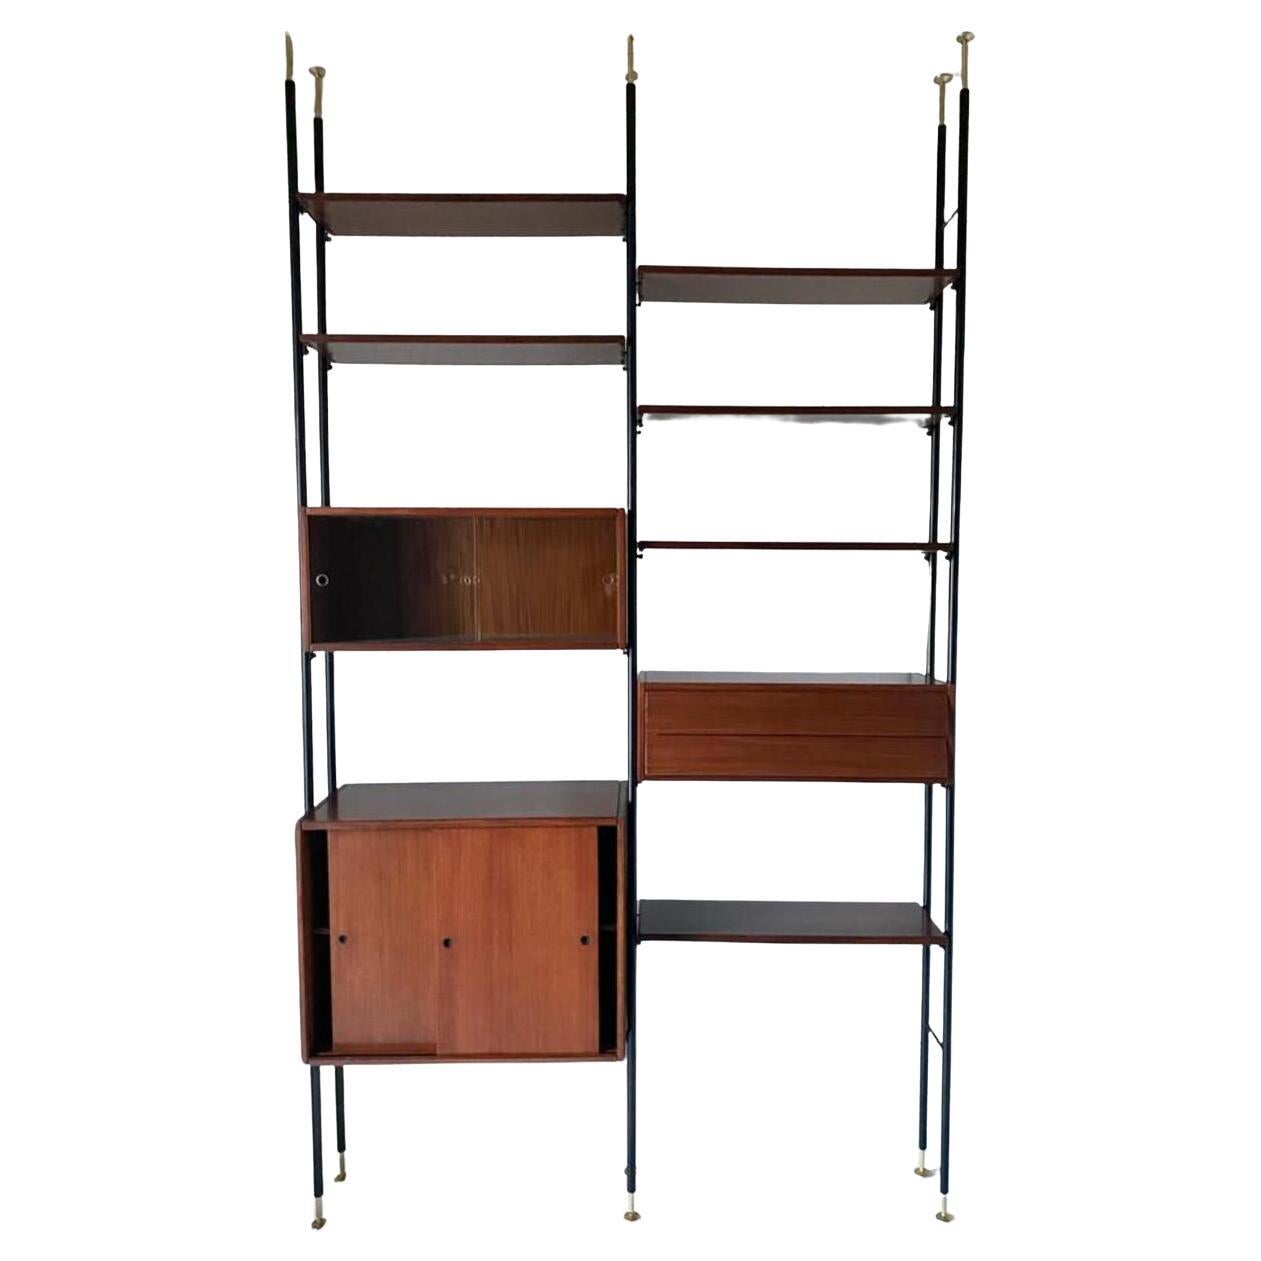 Adjustable Mid Century Modern Wall Unit in scandinavian style manufactured in Italy in the 1960 's.

Dark veneered wood structure made by one sliding doors drawer,  four elengatly refined drawers, a mirroed cupboard and six shelves. Modular